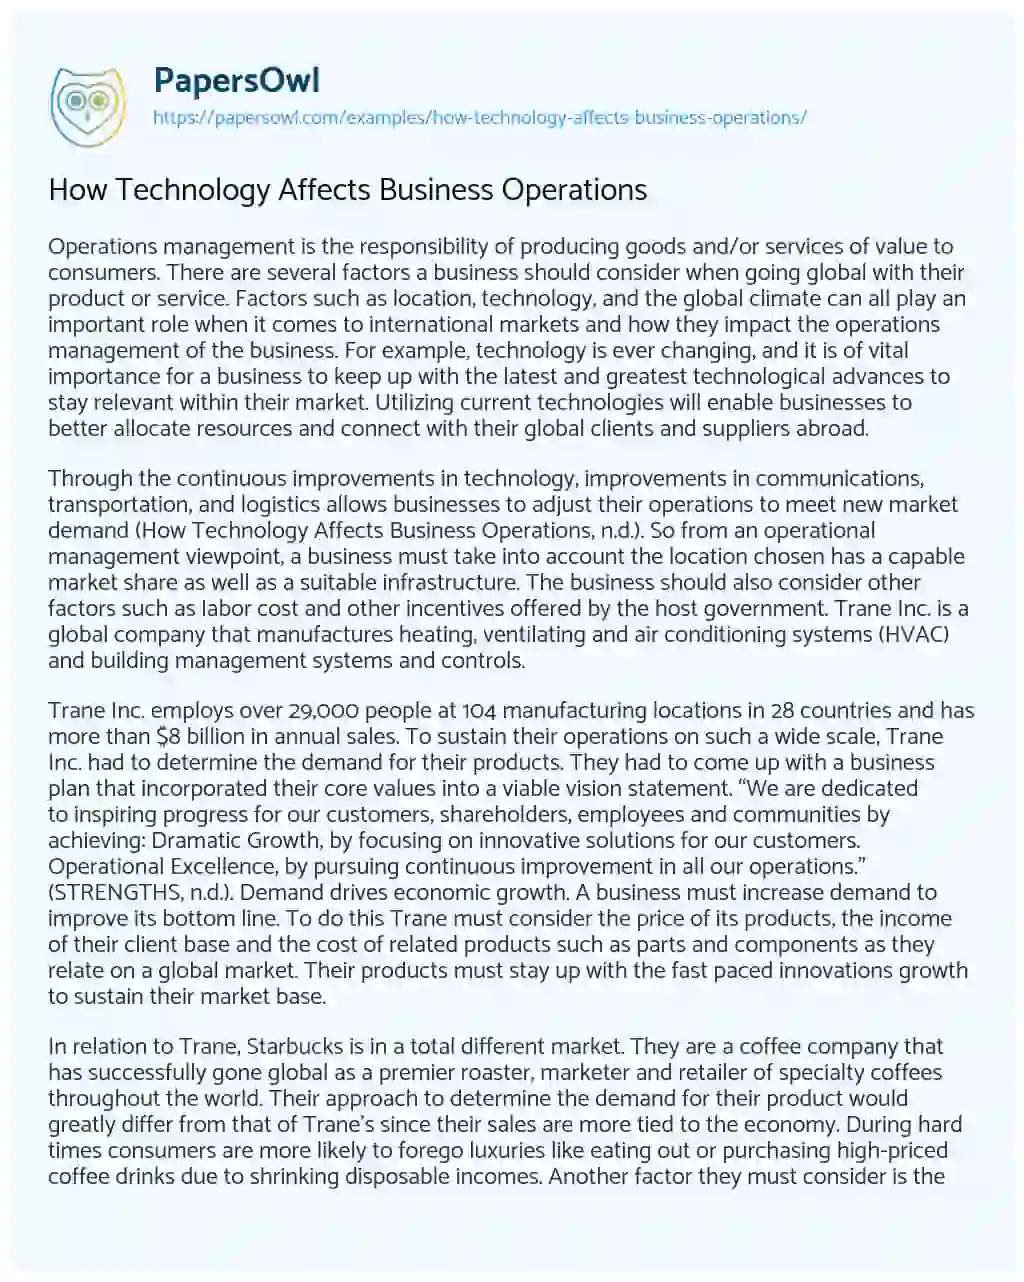 Essay on How Technology Affects Business Operations